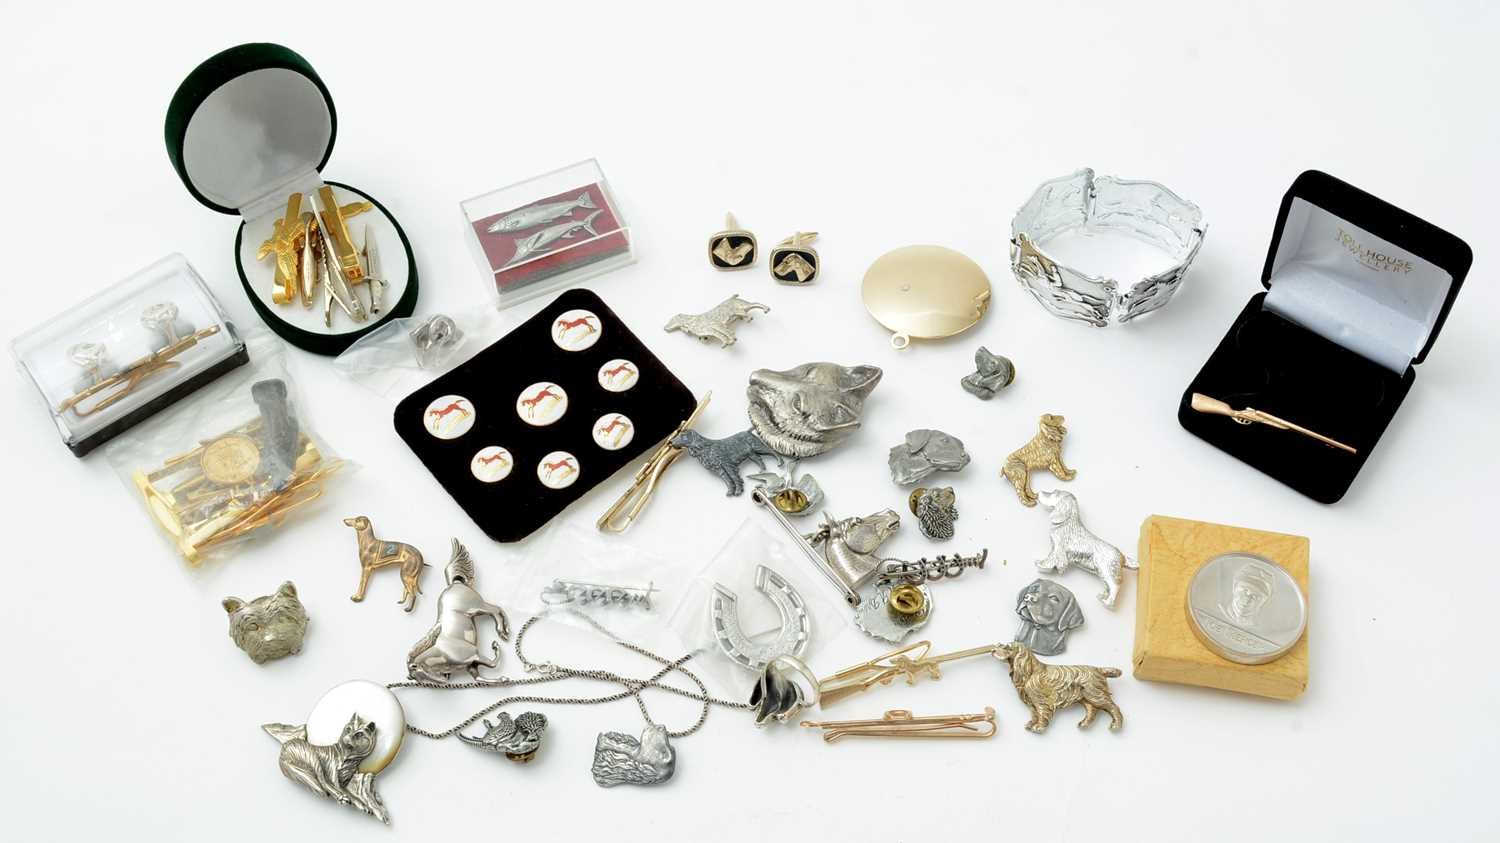 Lot 165 - A selection of Country Sports interest costume jewellery